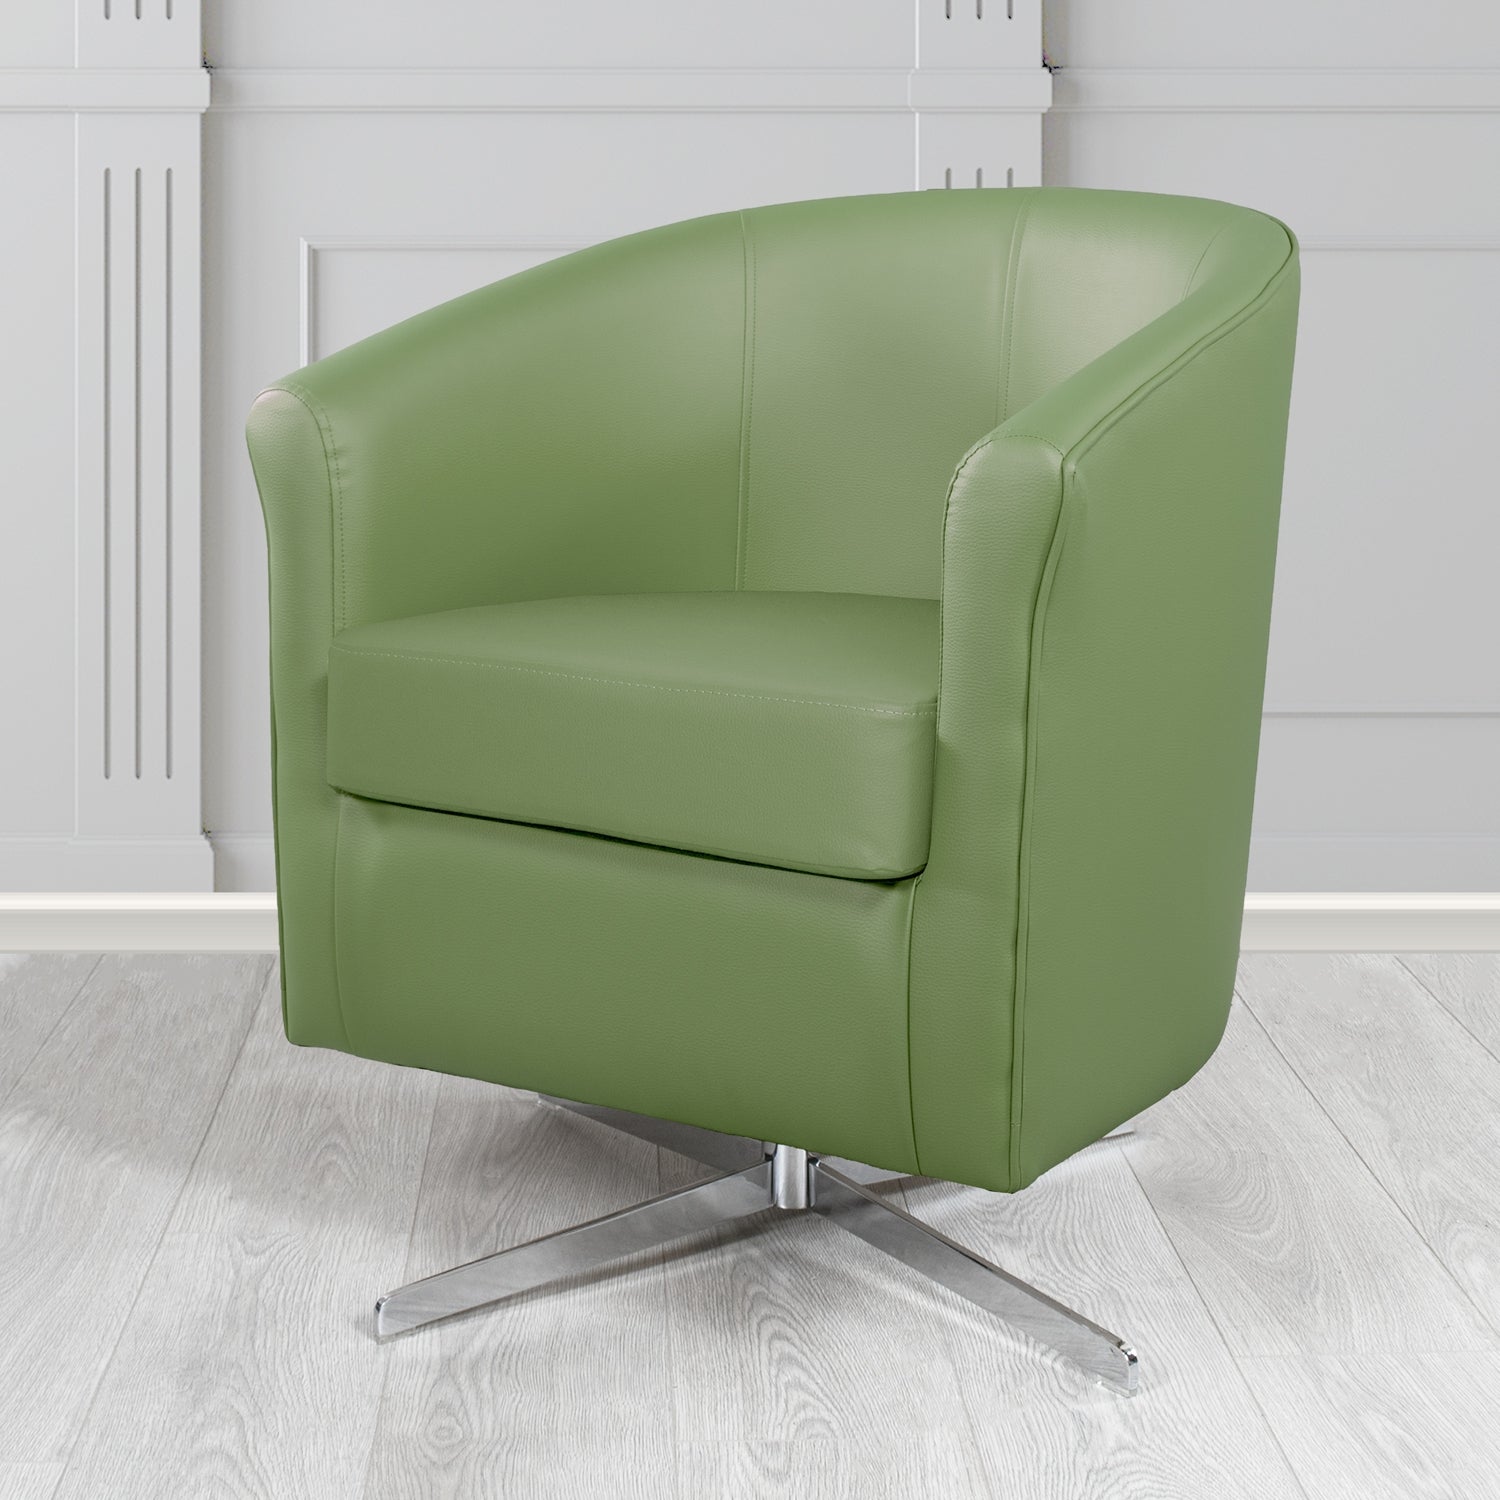 Cannes Swivel Tub Chair in Just Colour Wasabi Crib 5 Faux Leather - The Tub Chair Shop